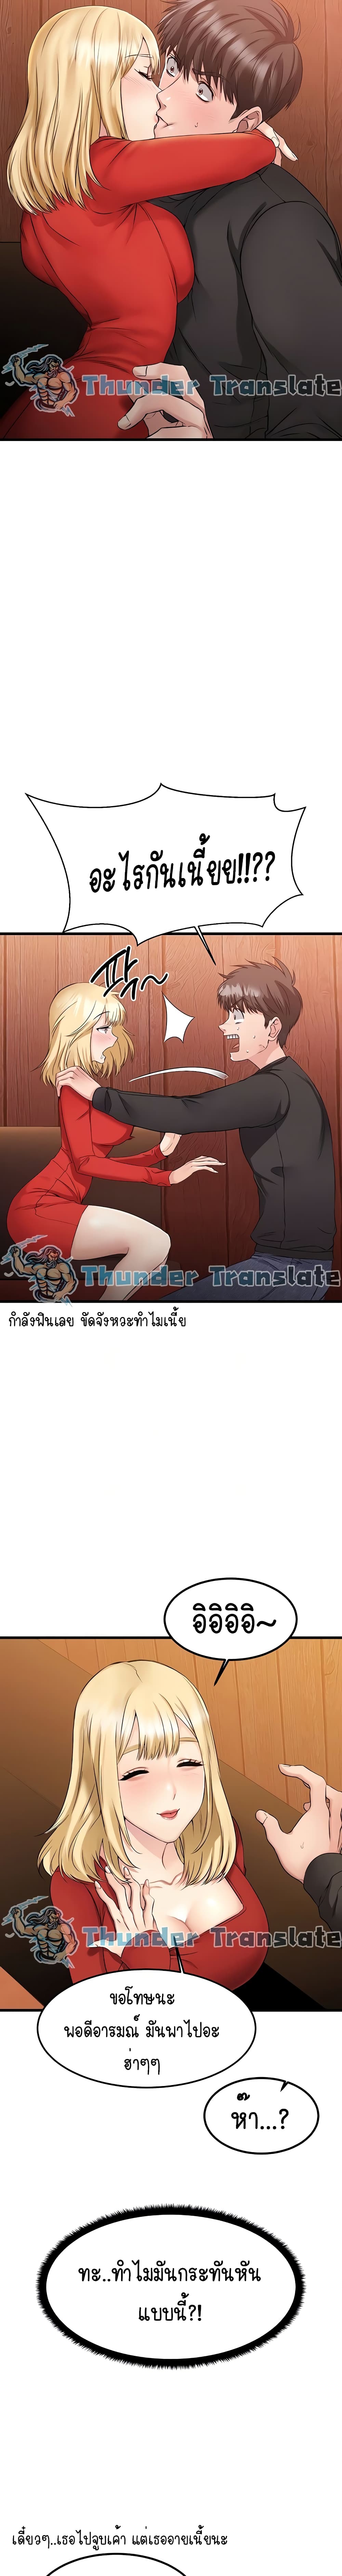 My Female Friend Who Crossed The Line 2 ภาพที่ 3